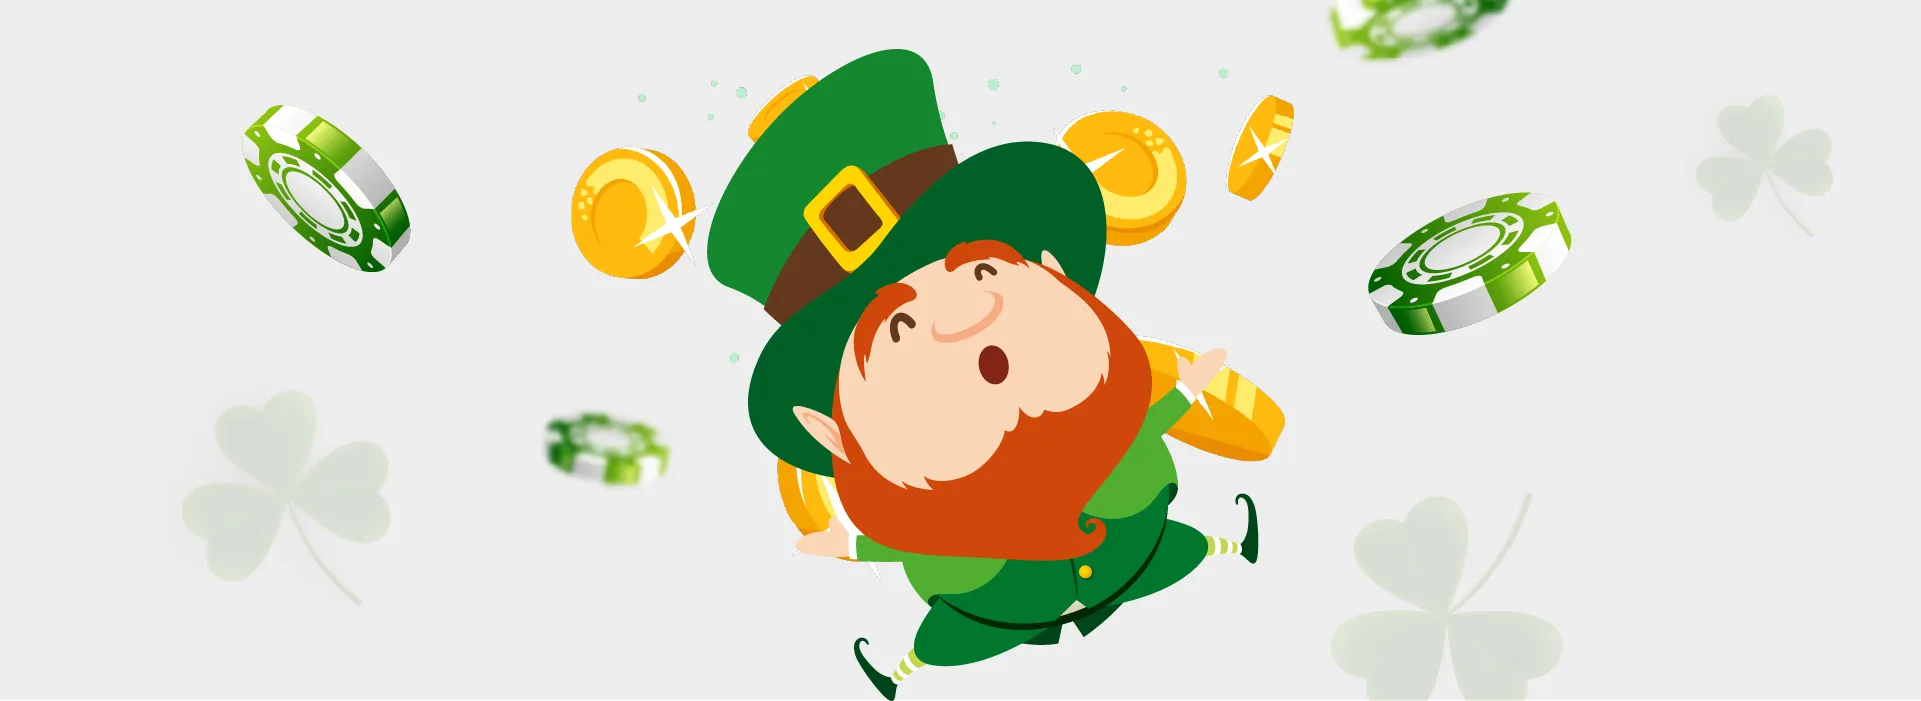 An image of a leprechaun dancing with coins and casino chips around